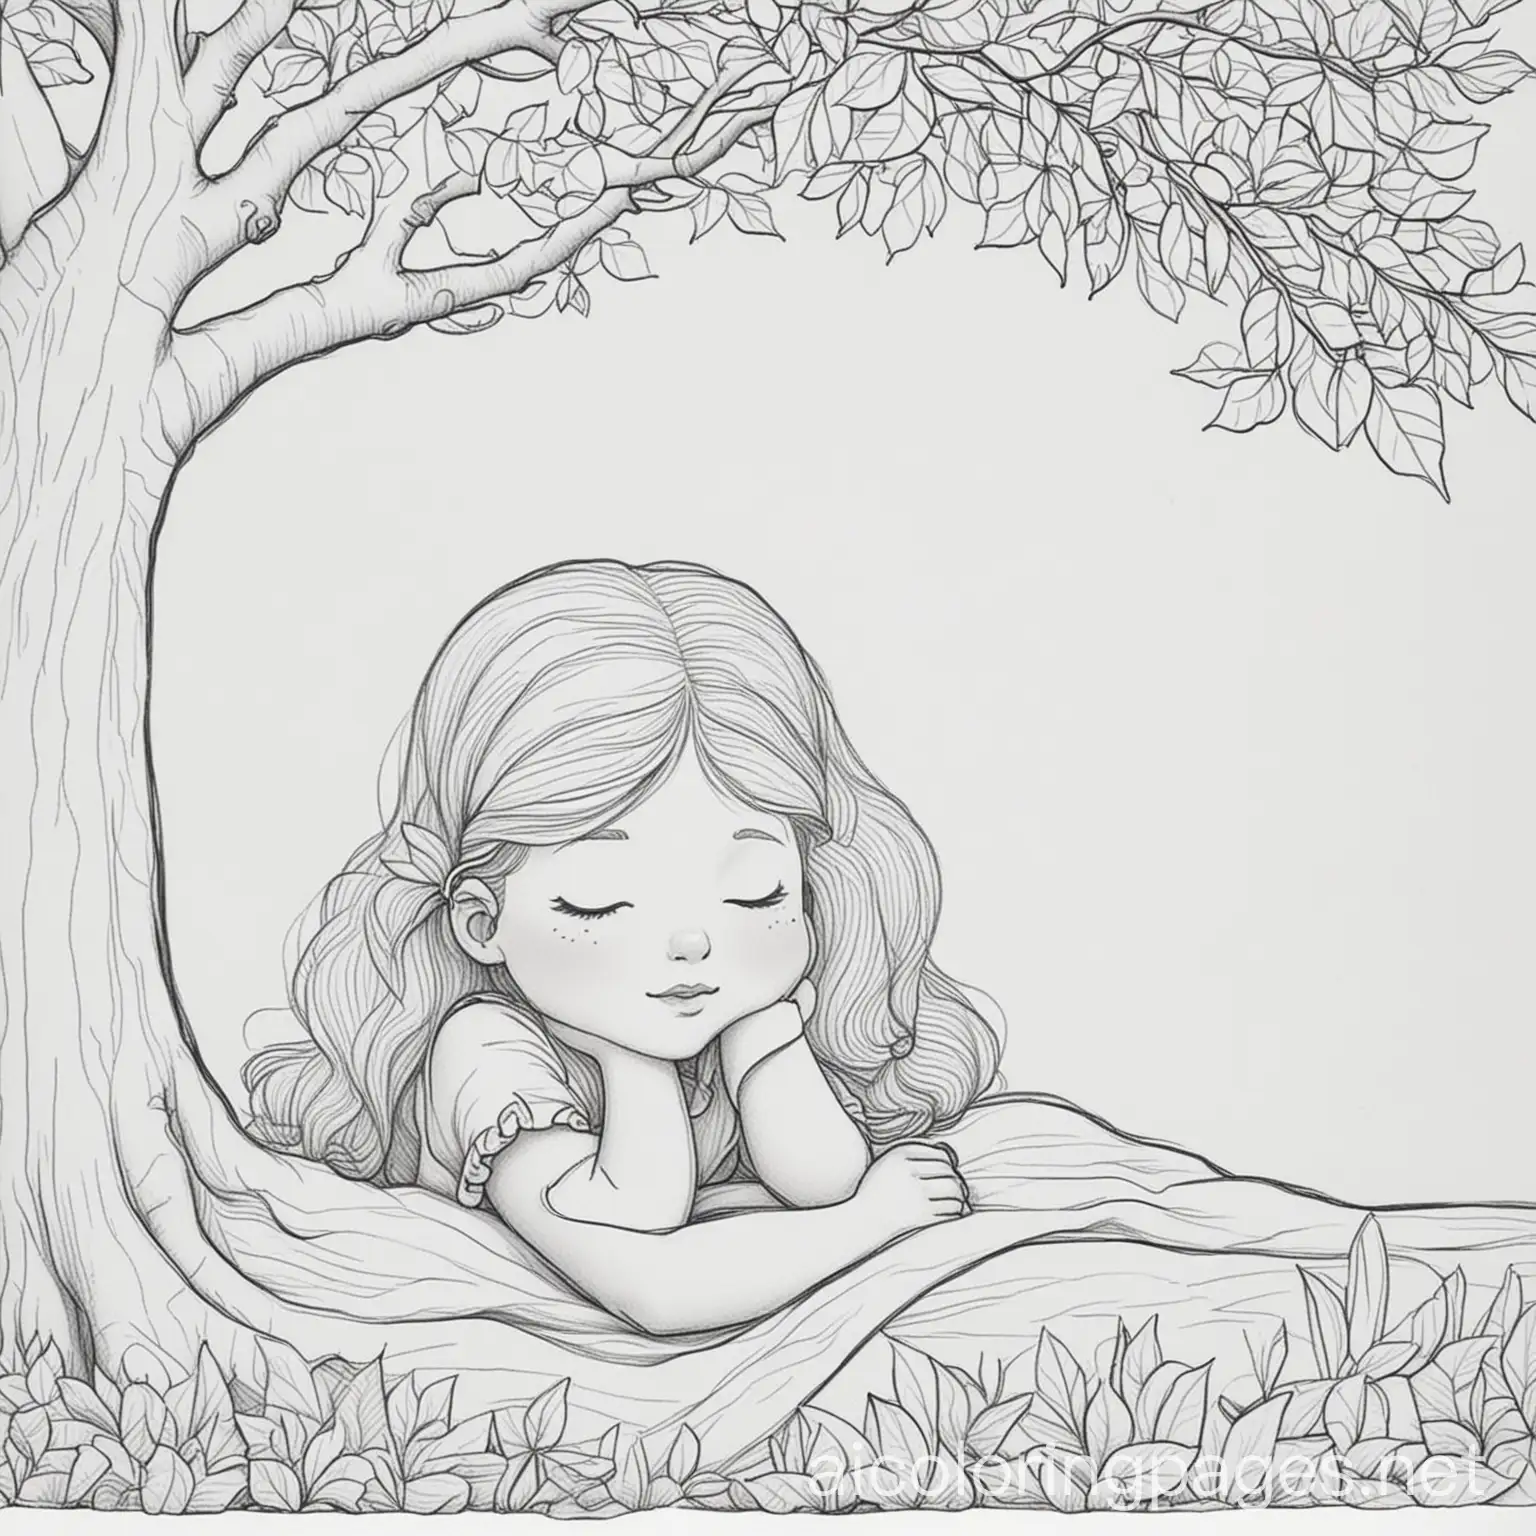 Girl-Sleeping-Under-Tree-Coloring-Page-Simple-Black-and-White-Line-Art